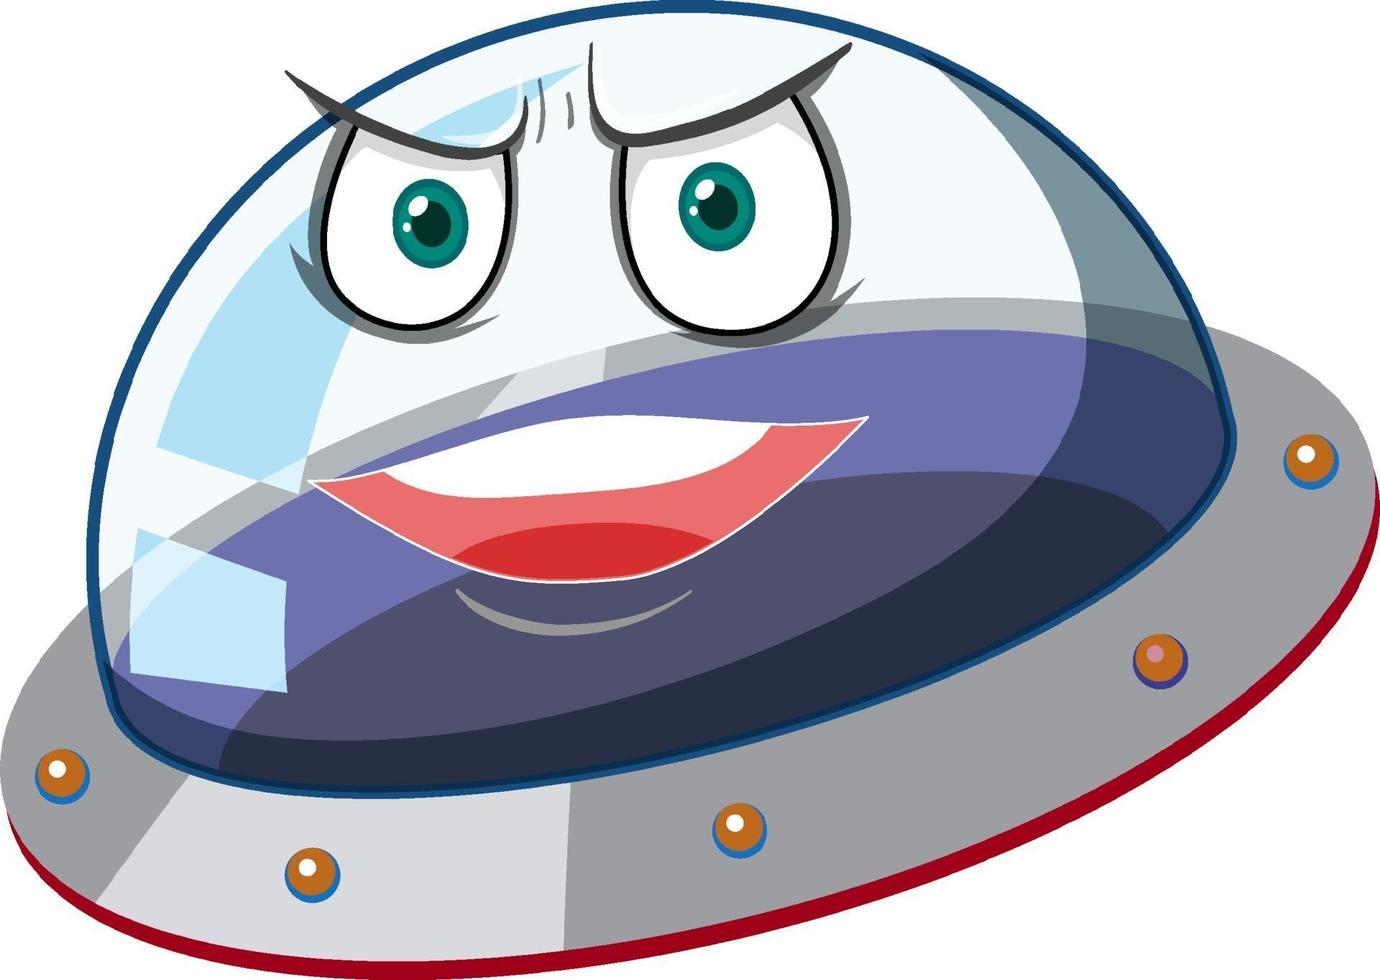 Ufo with angry face expression on white background vector